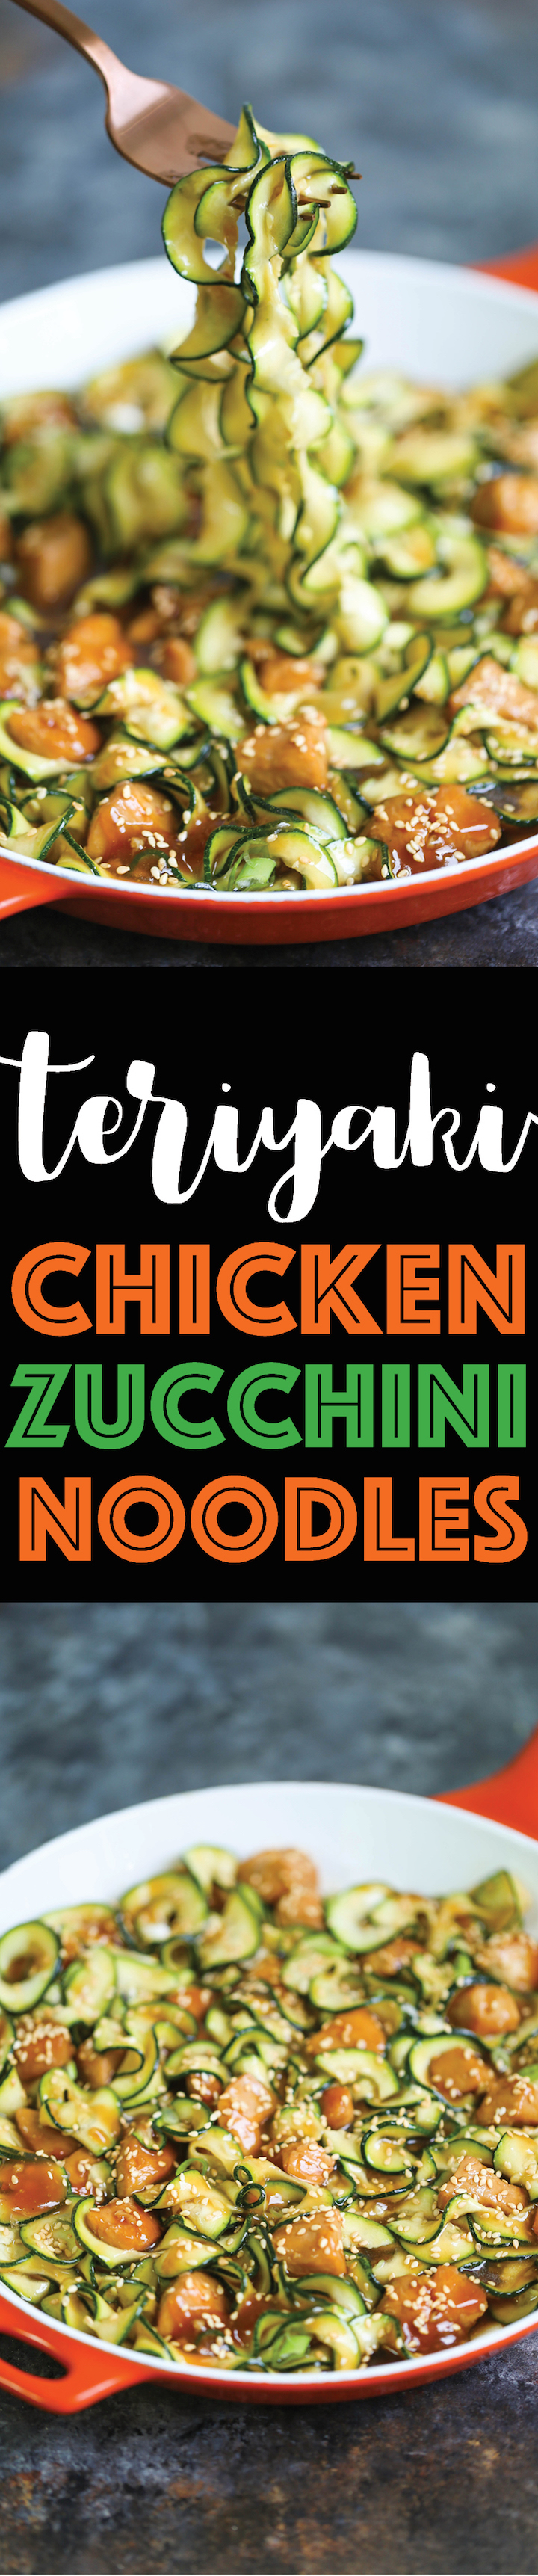 Teriyaki Chicken Zucchini Noodles - The easiest 10-minute HEALTHY and LOW-CARB Asian zucchini noodles with a homemade teriyaki sauce made from scratch!!!